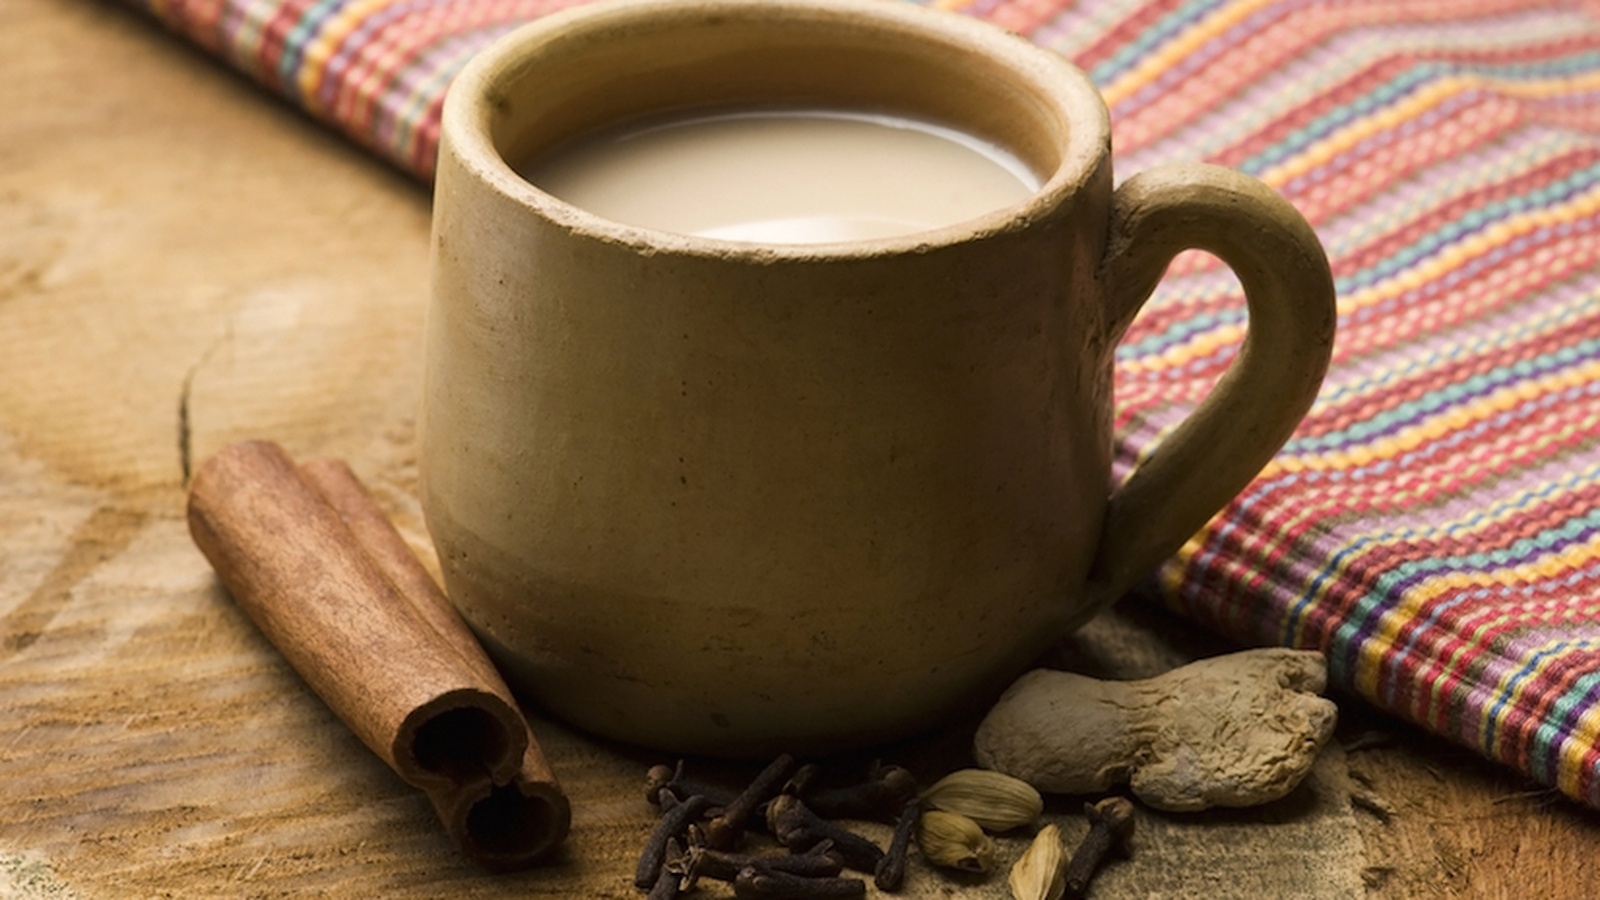 How To Make a Warming Chai